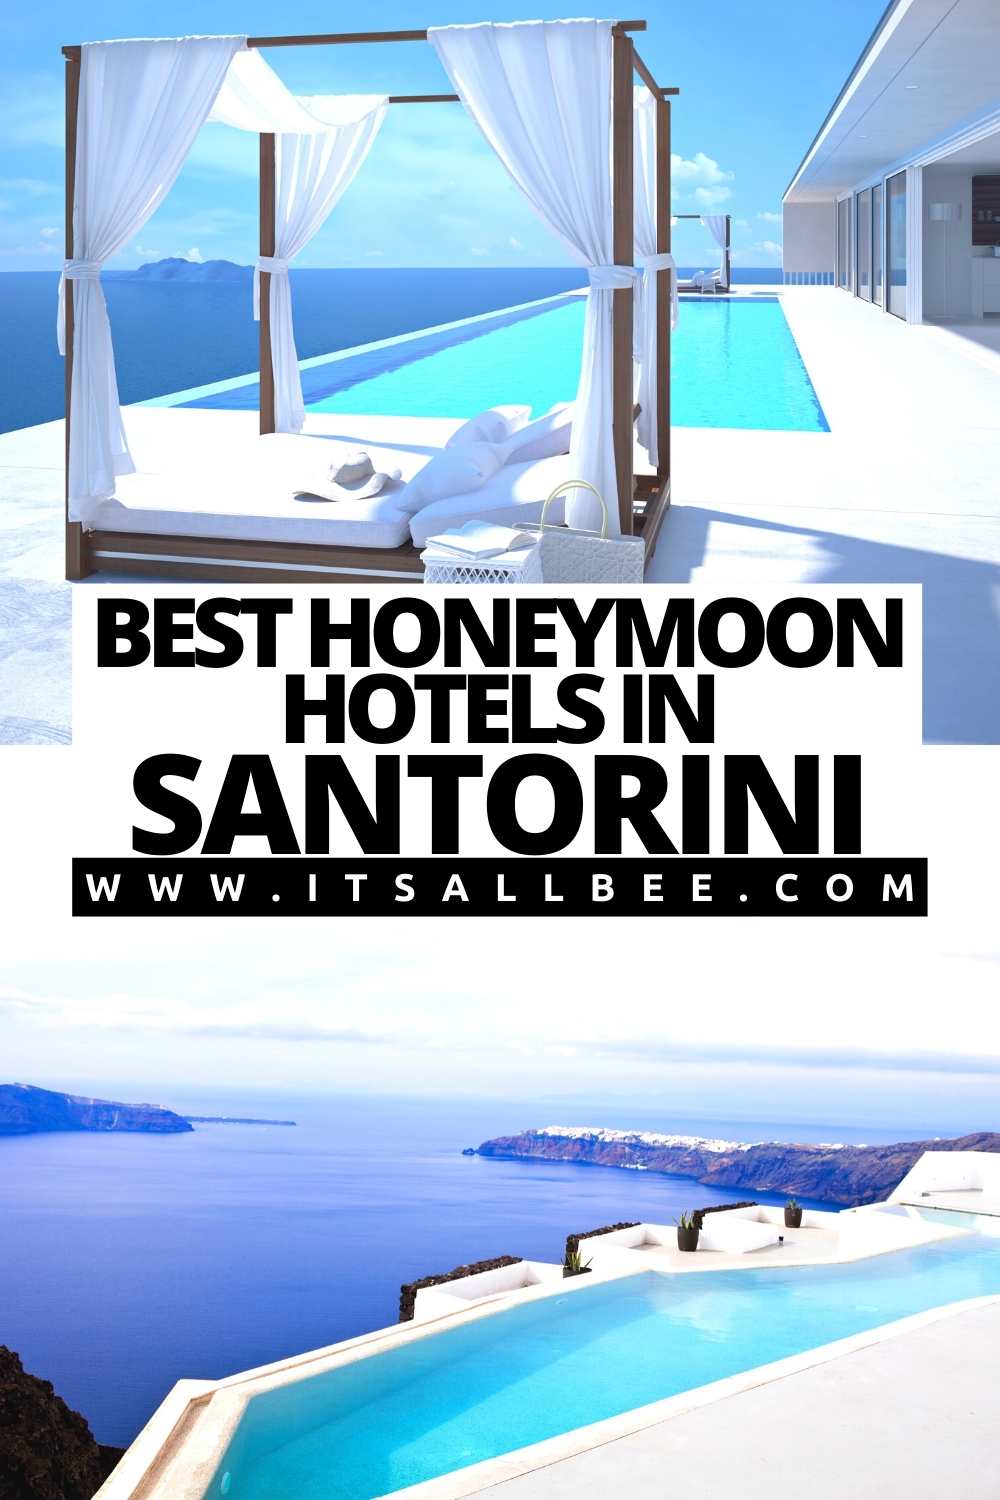  | Best places to stay in santorini for honeymoon | Best Hotels In Santorini For Honeymoon | Best Resort In Santorini For Honeymoon | Santorini Honeymoon Romantic Vacations | Best Honeymoon Hotels In Santorini | 